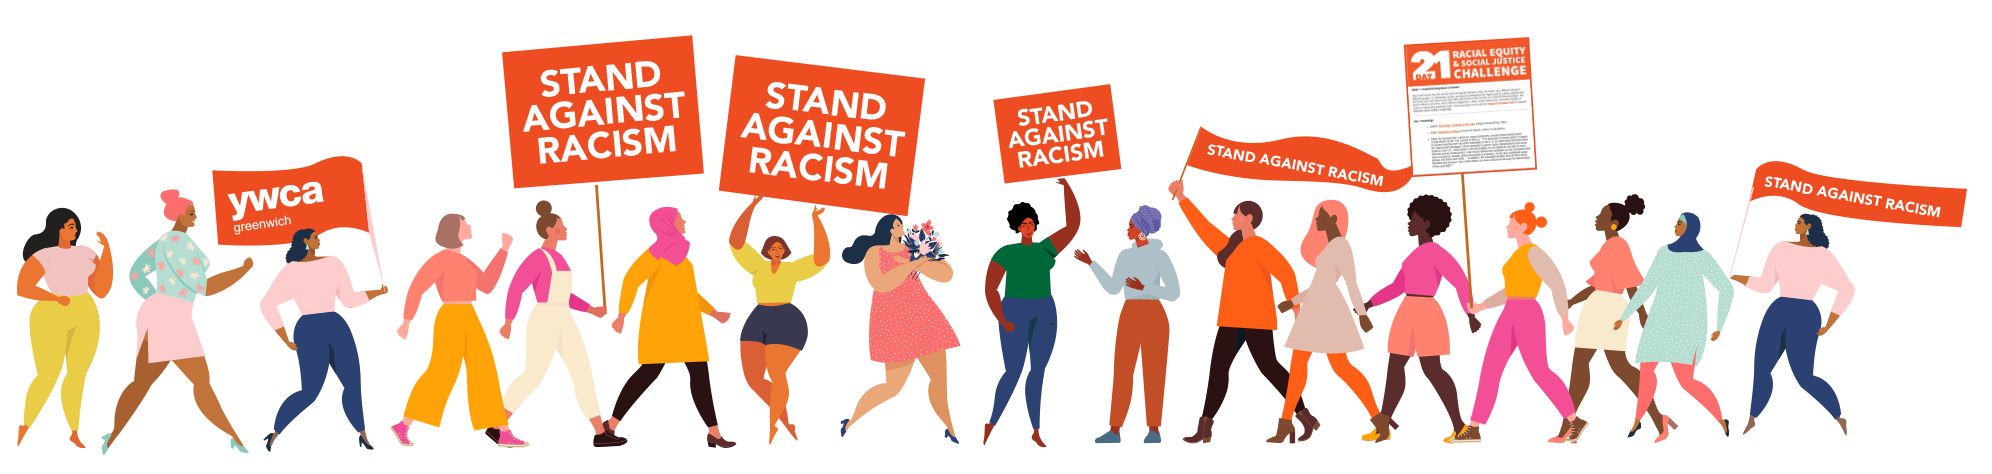 YWCA Stand Against Racism banner